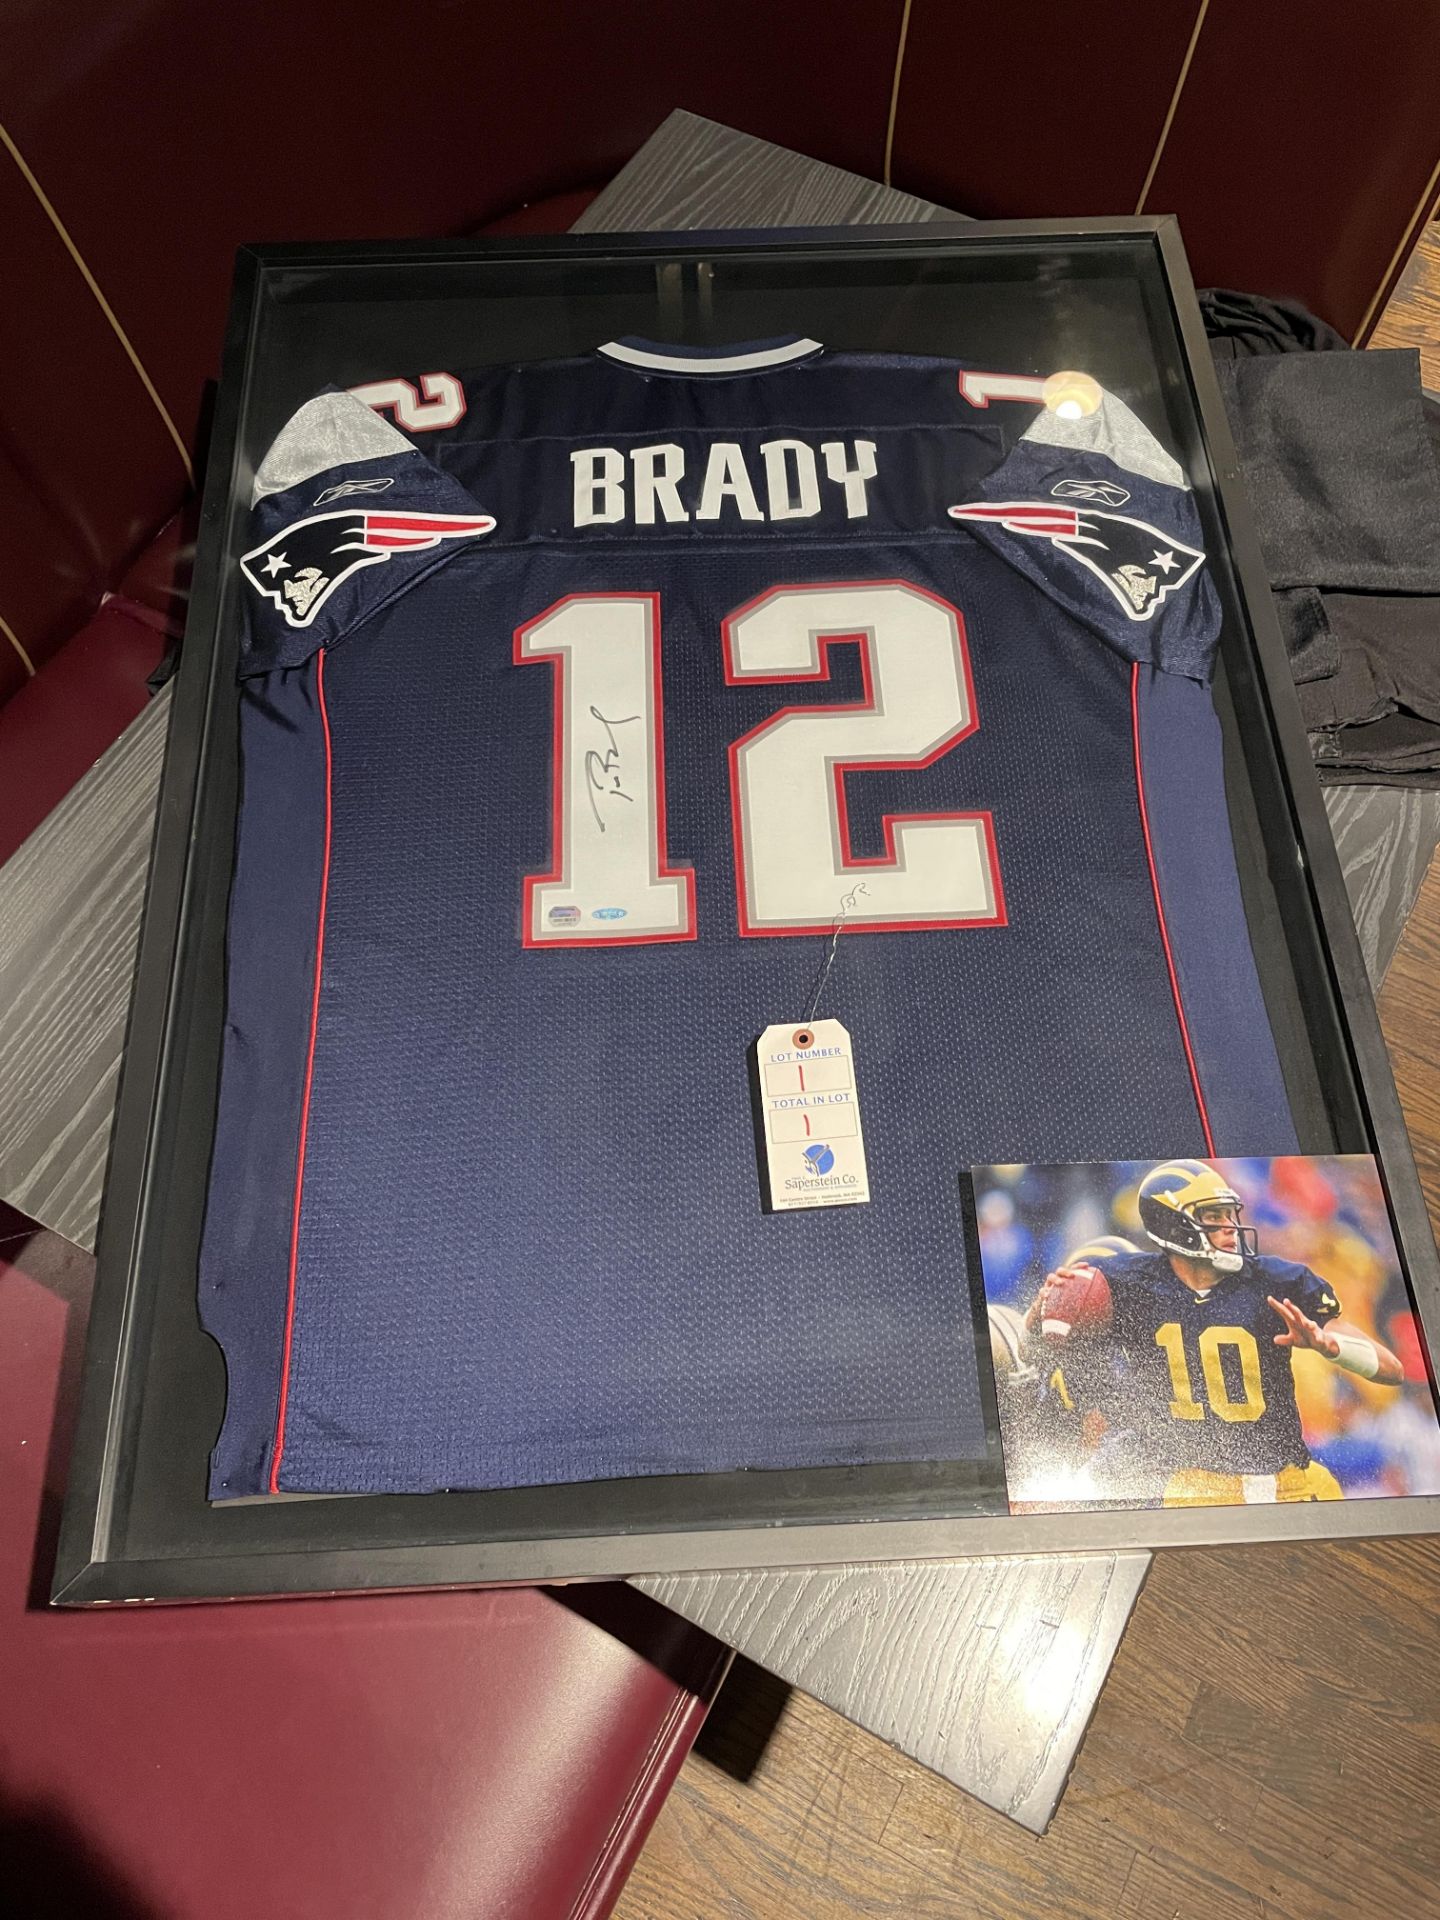 Tom Brady Autographed Patriots Jersey, Frame Mounted Authentication #0100105 From Mounted Memory.